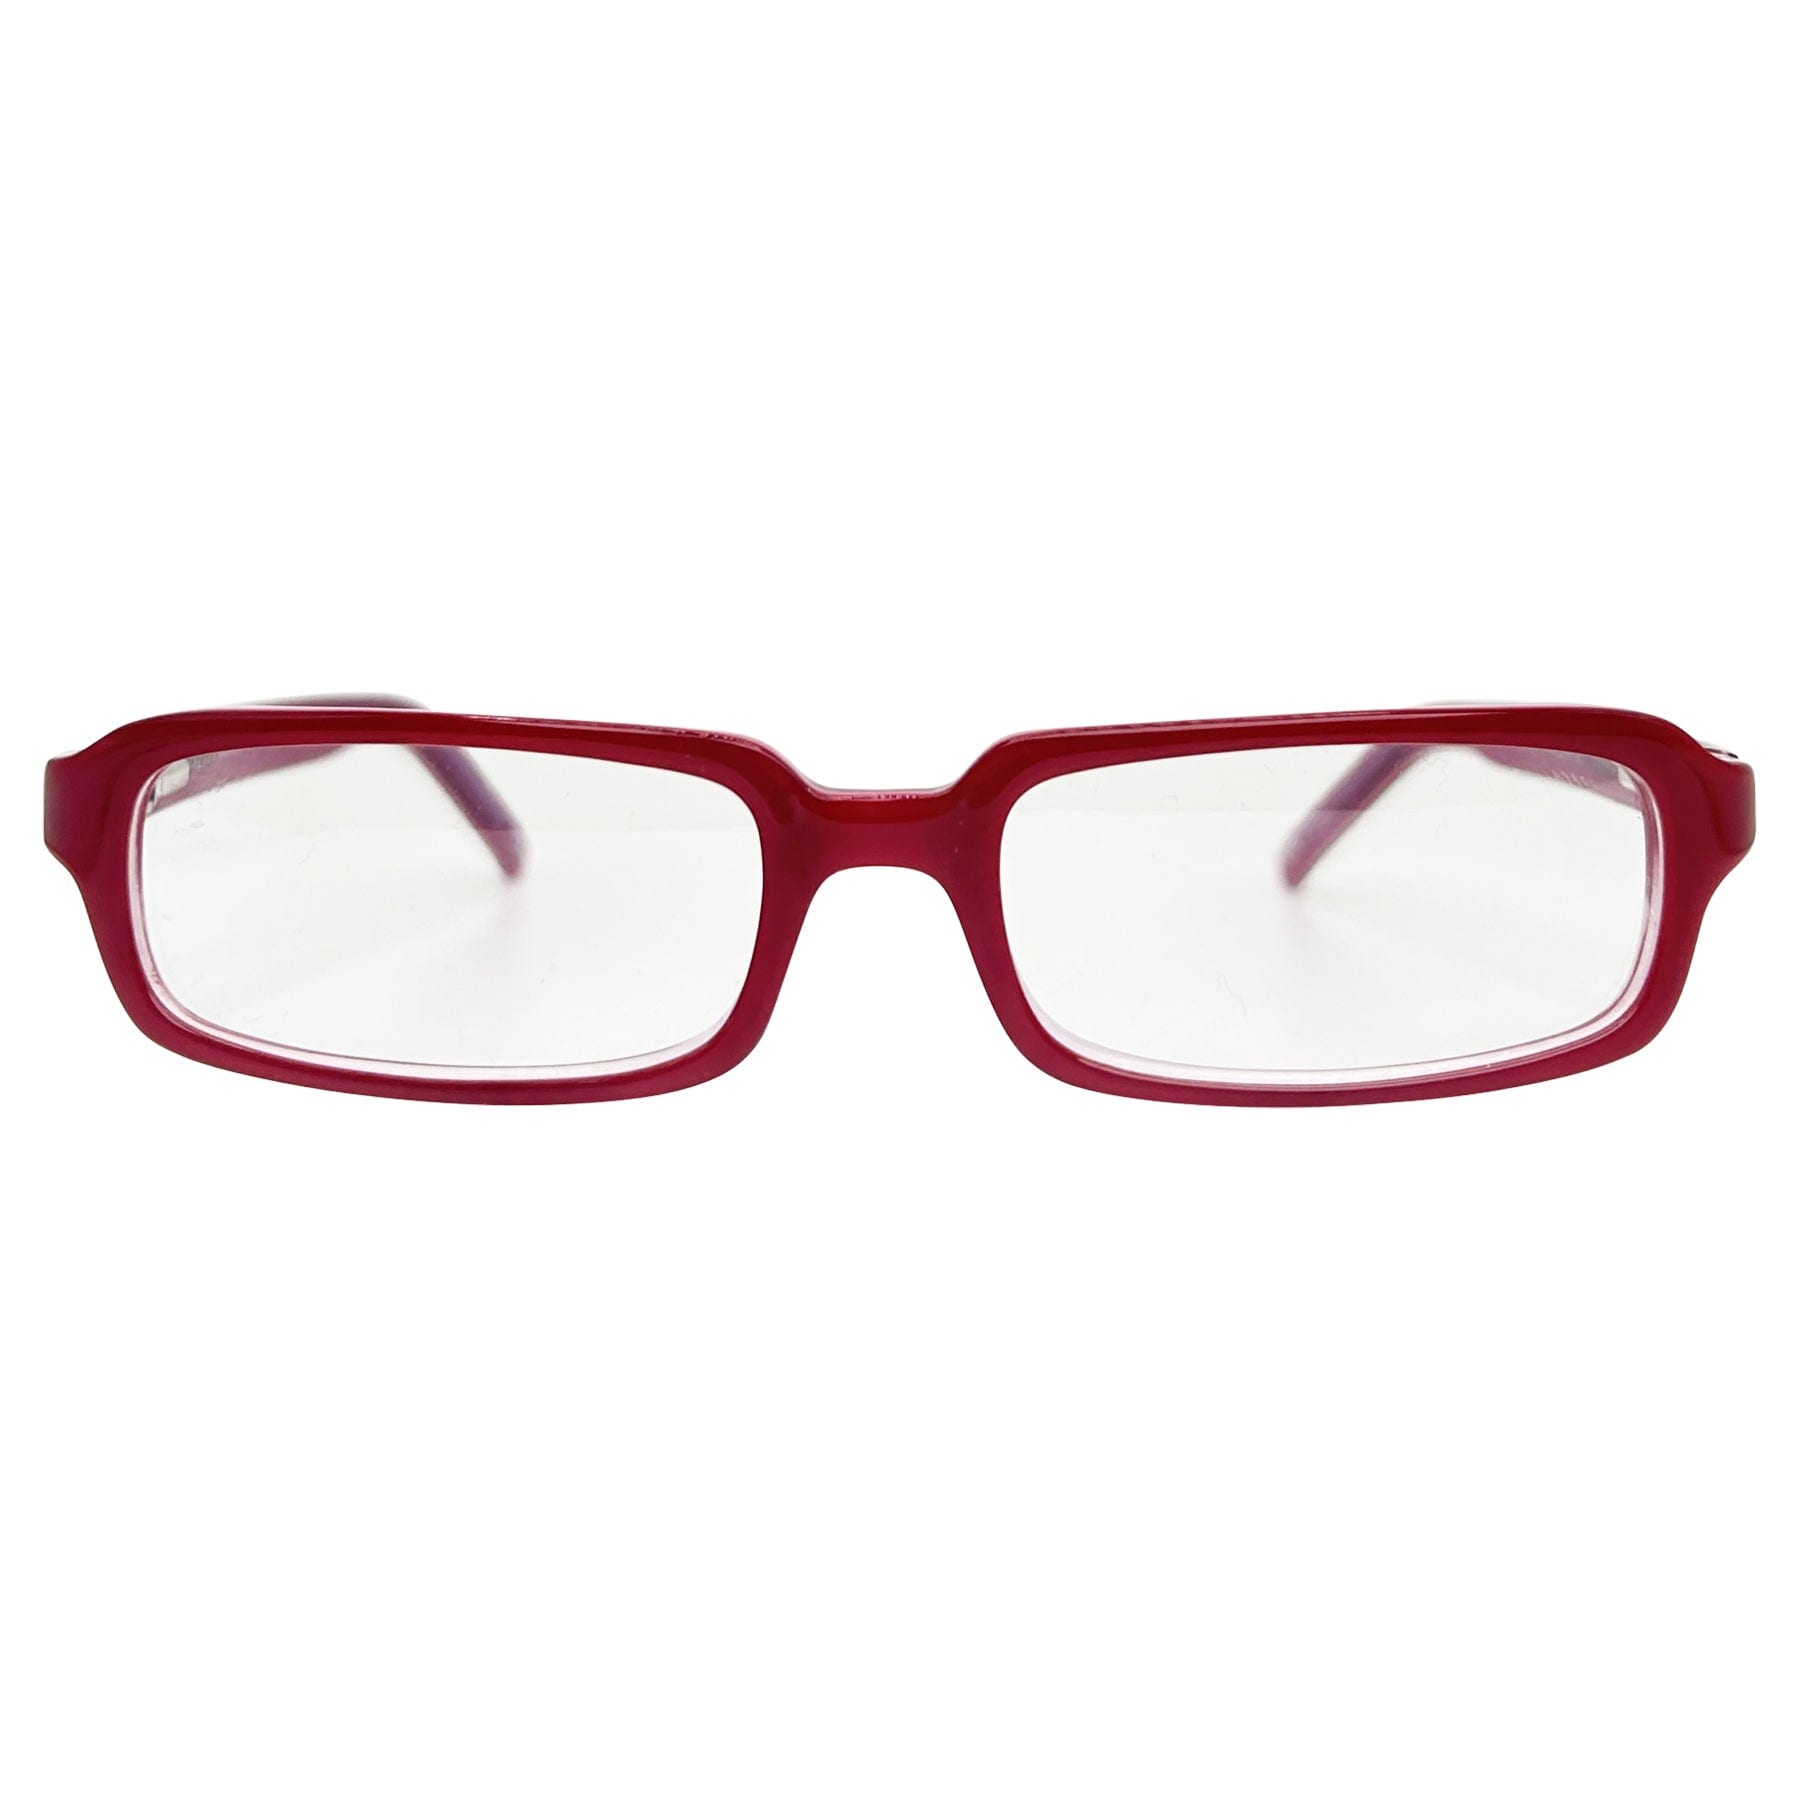 red vintage glasses with a small rectangular frame and bayonetta-style